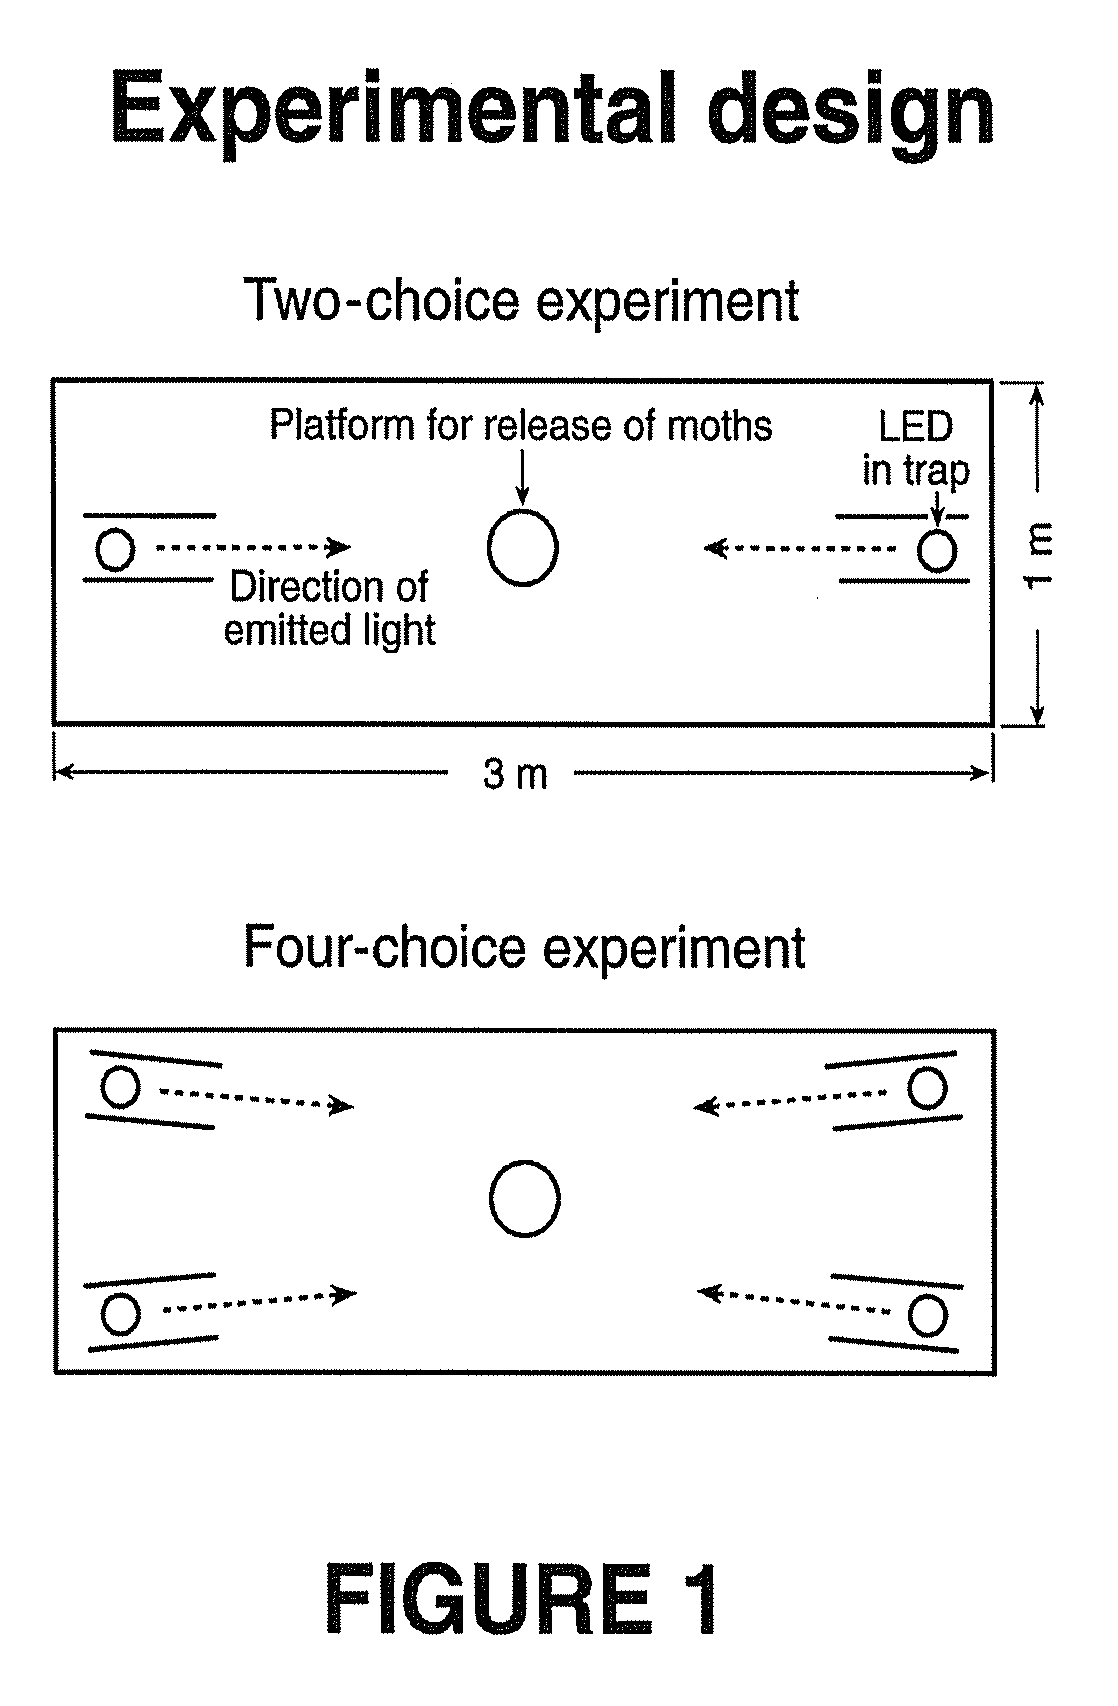 Apparatus and Method for Emitting Specific Wavelengths of Visible Light to Manipulate the Behavior of Stored Product Insect Pests